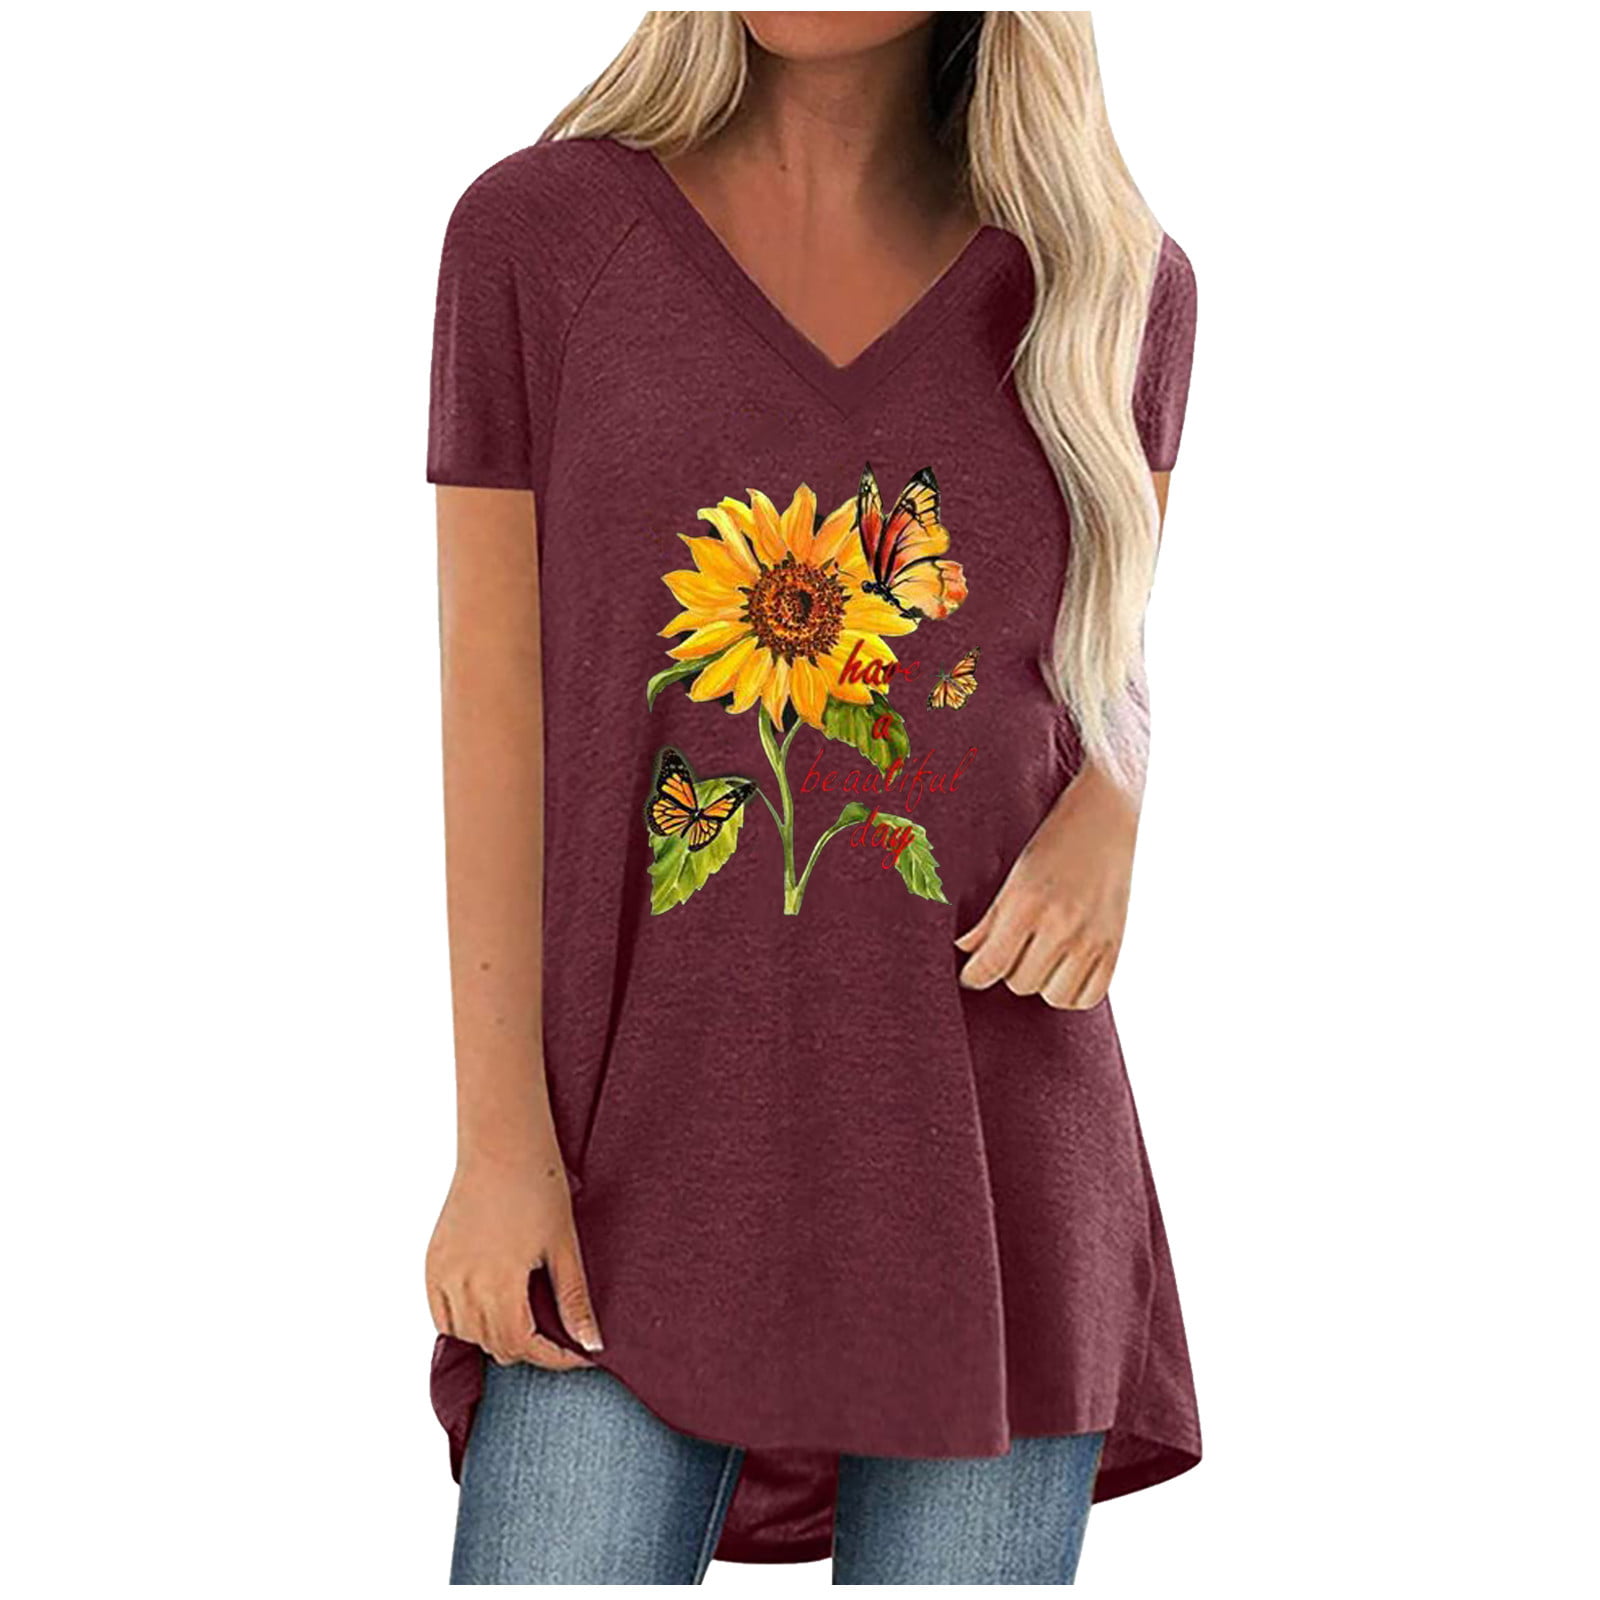 Western Shirts Country Graphic Short Sleeve Beach Tops for Women 2022  Casual Tee V Neck Vintage Summer T Shirt - Walmart.com